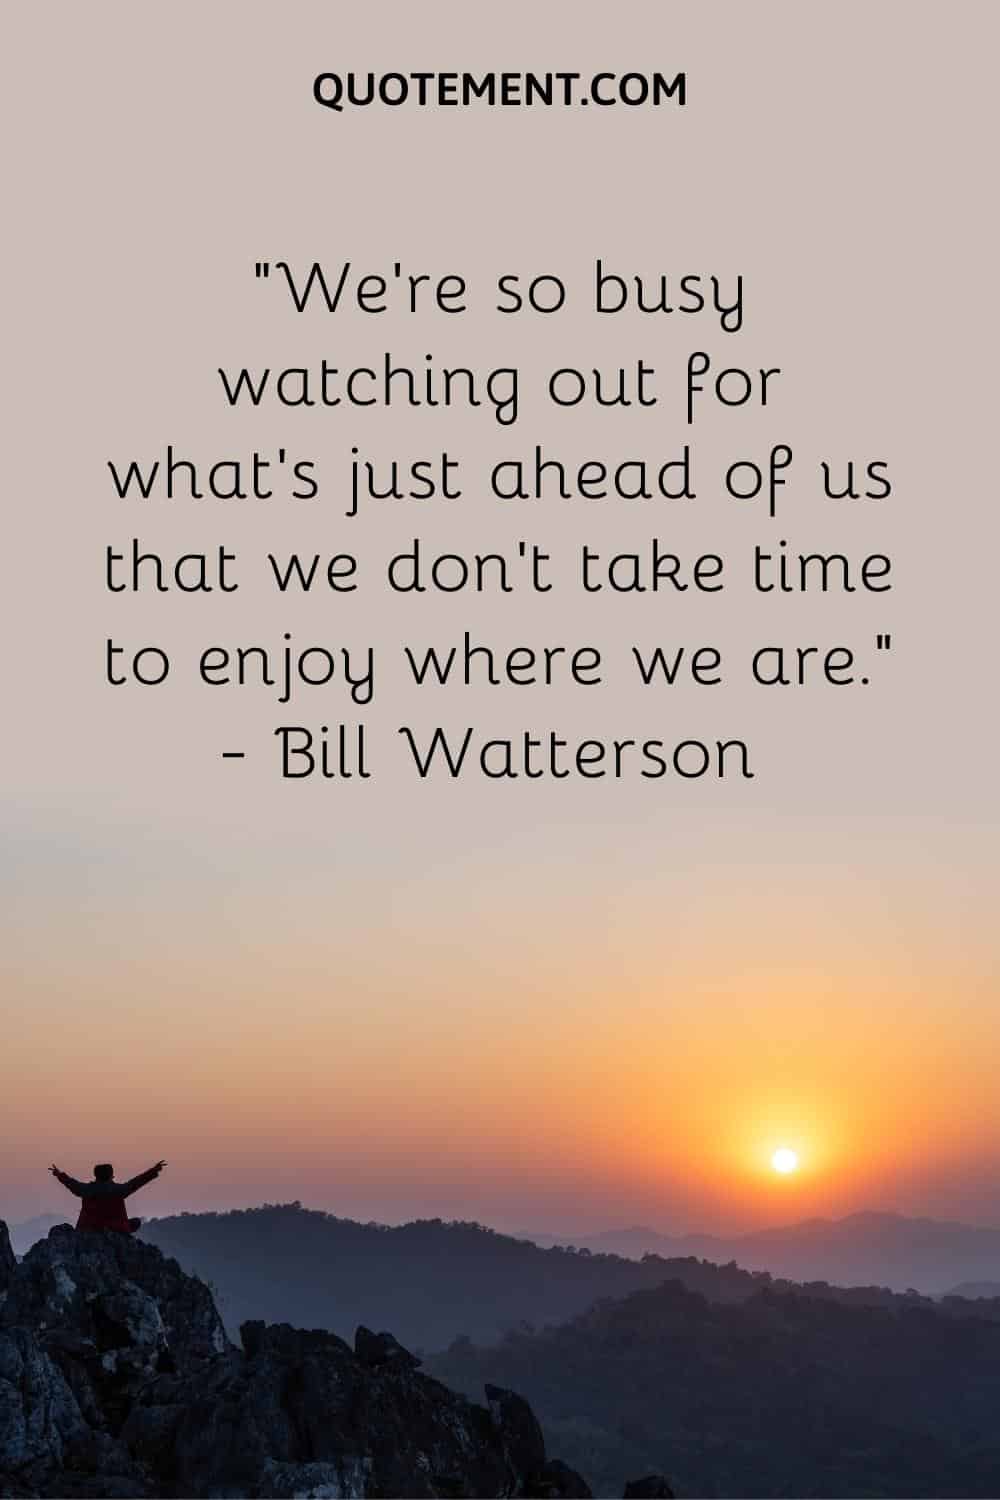 We’re so busy watching out for what’s just ahead of us that we don’t take time to enjoy where we are